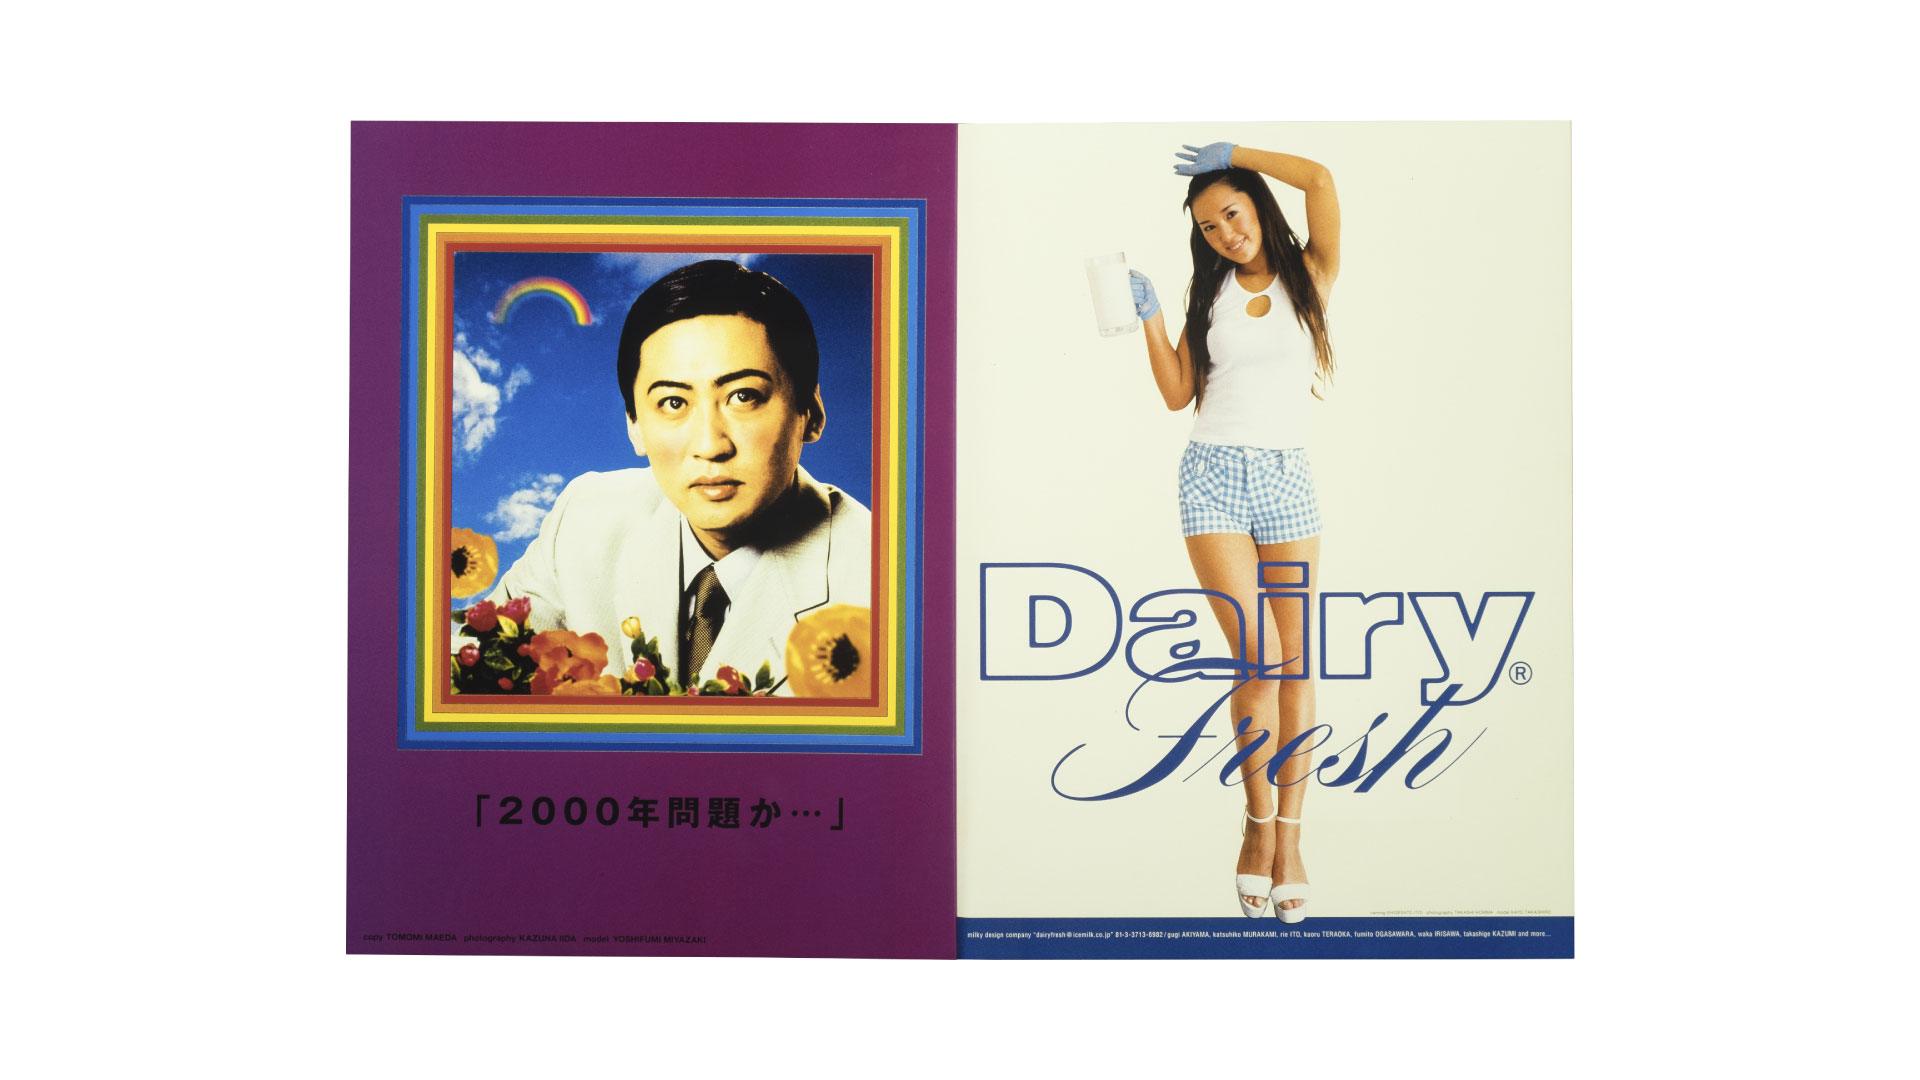 A.D.2000 広告批評 Special Issue